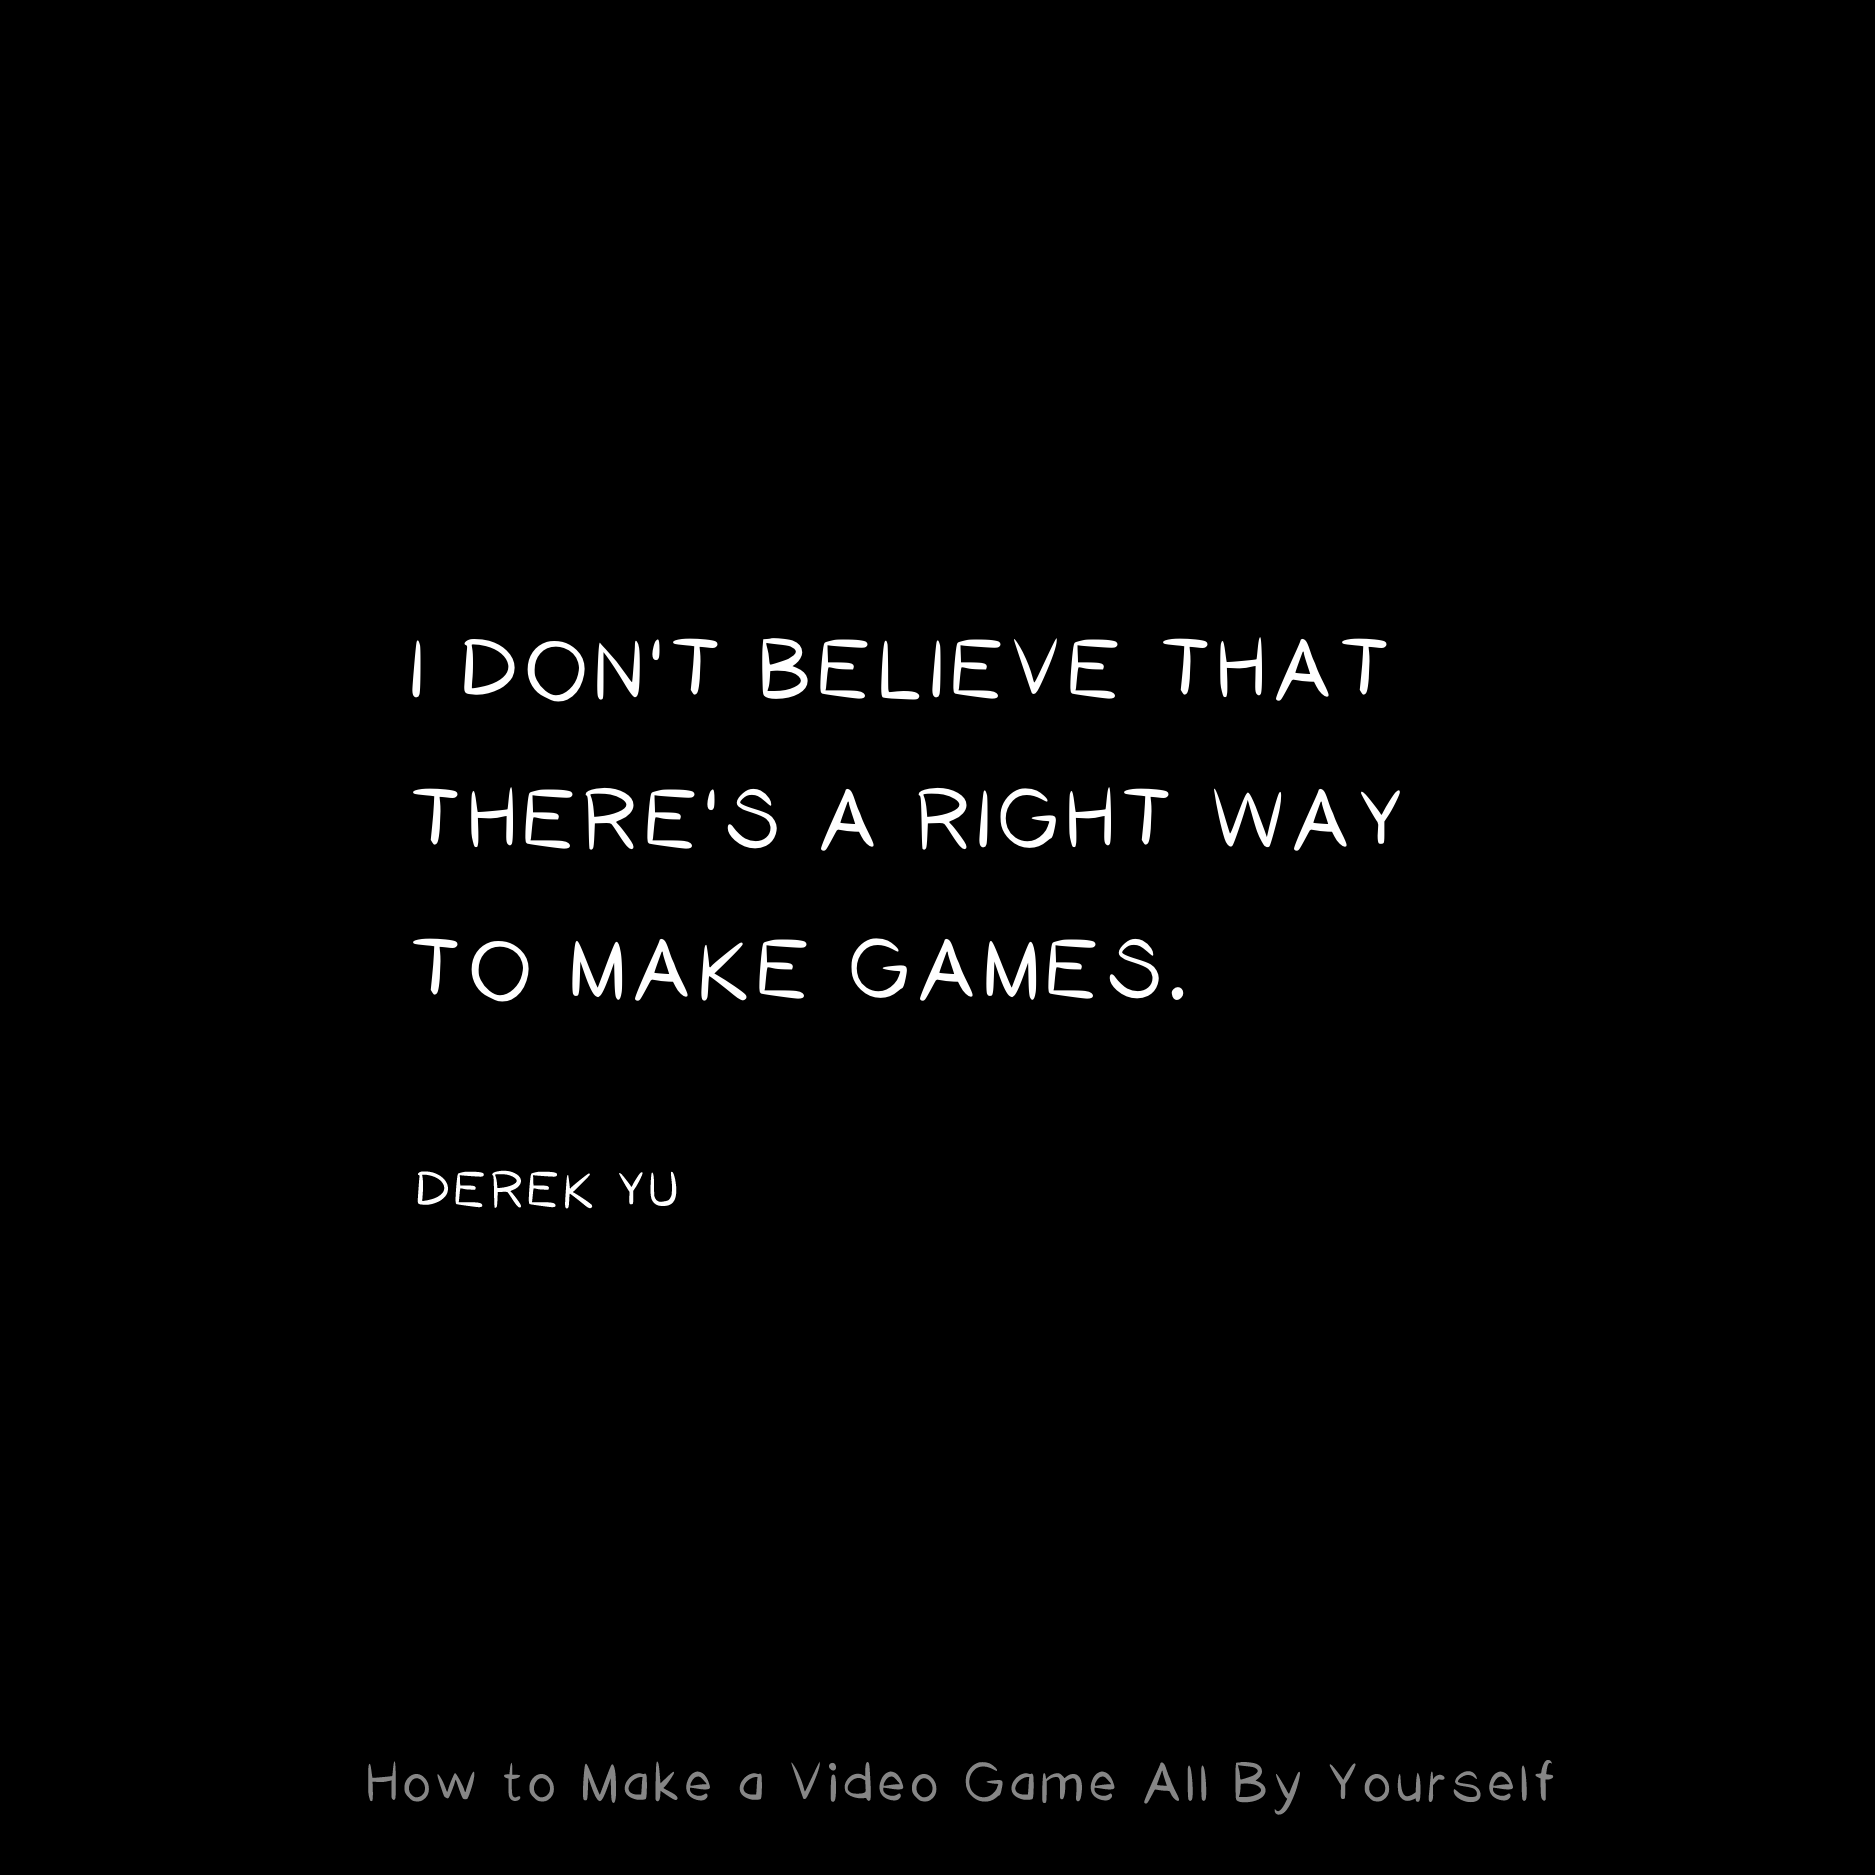 I don't believe that there's a right way to make games. - Derek Yu